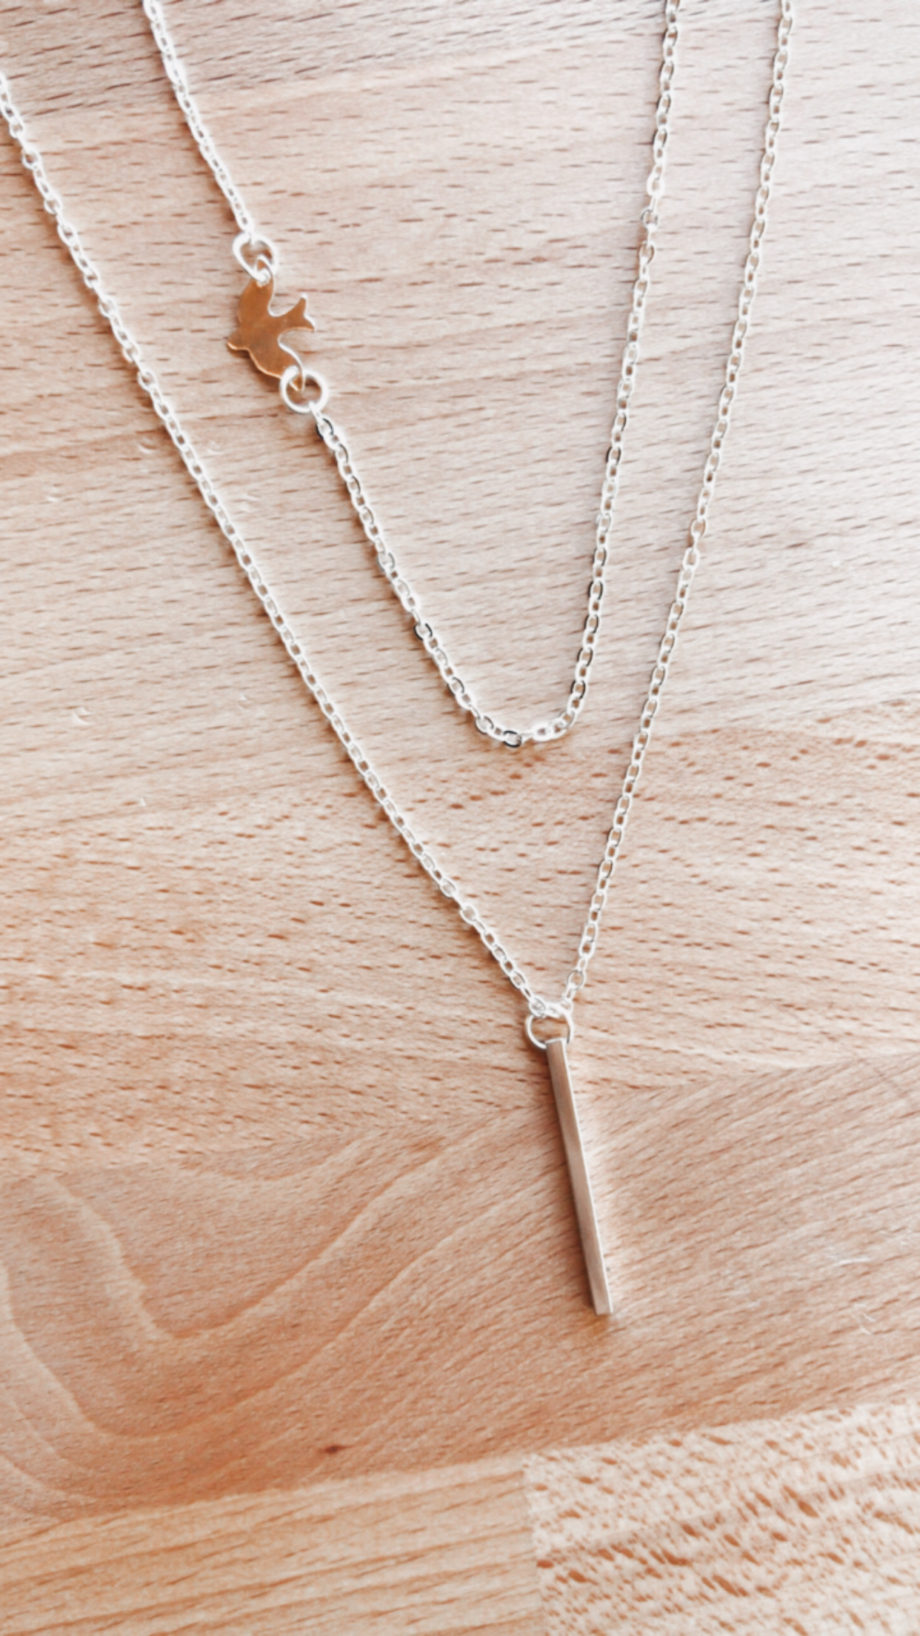 Sparrow Layered Necklace | Bird Necklace | Shop Women's Jewelry